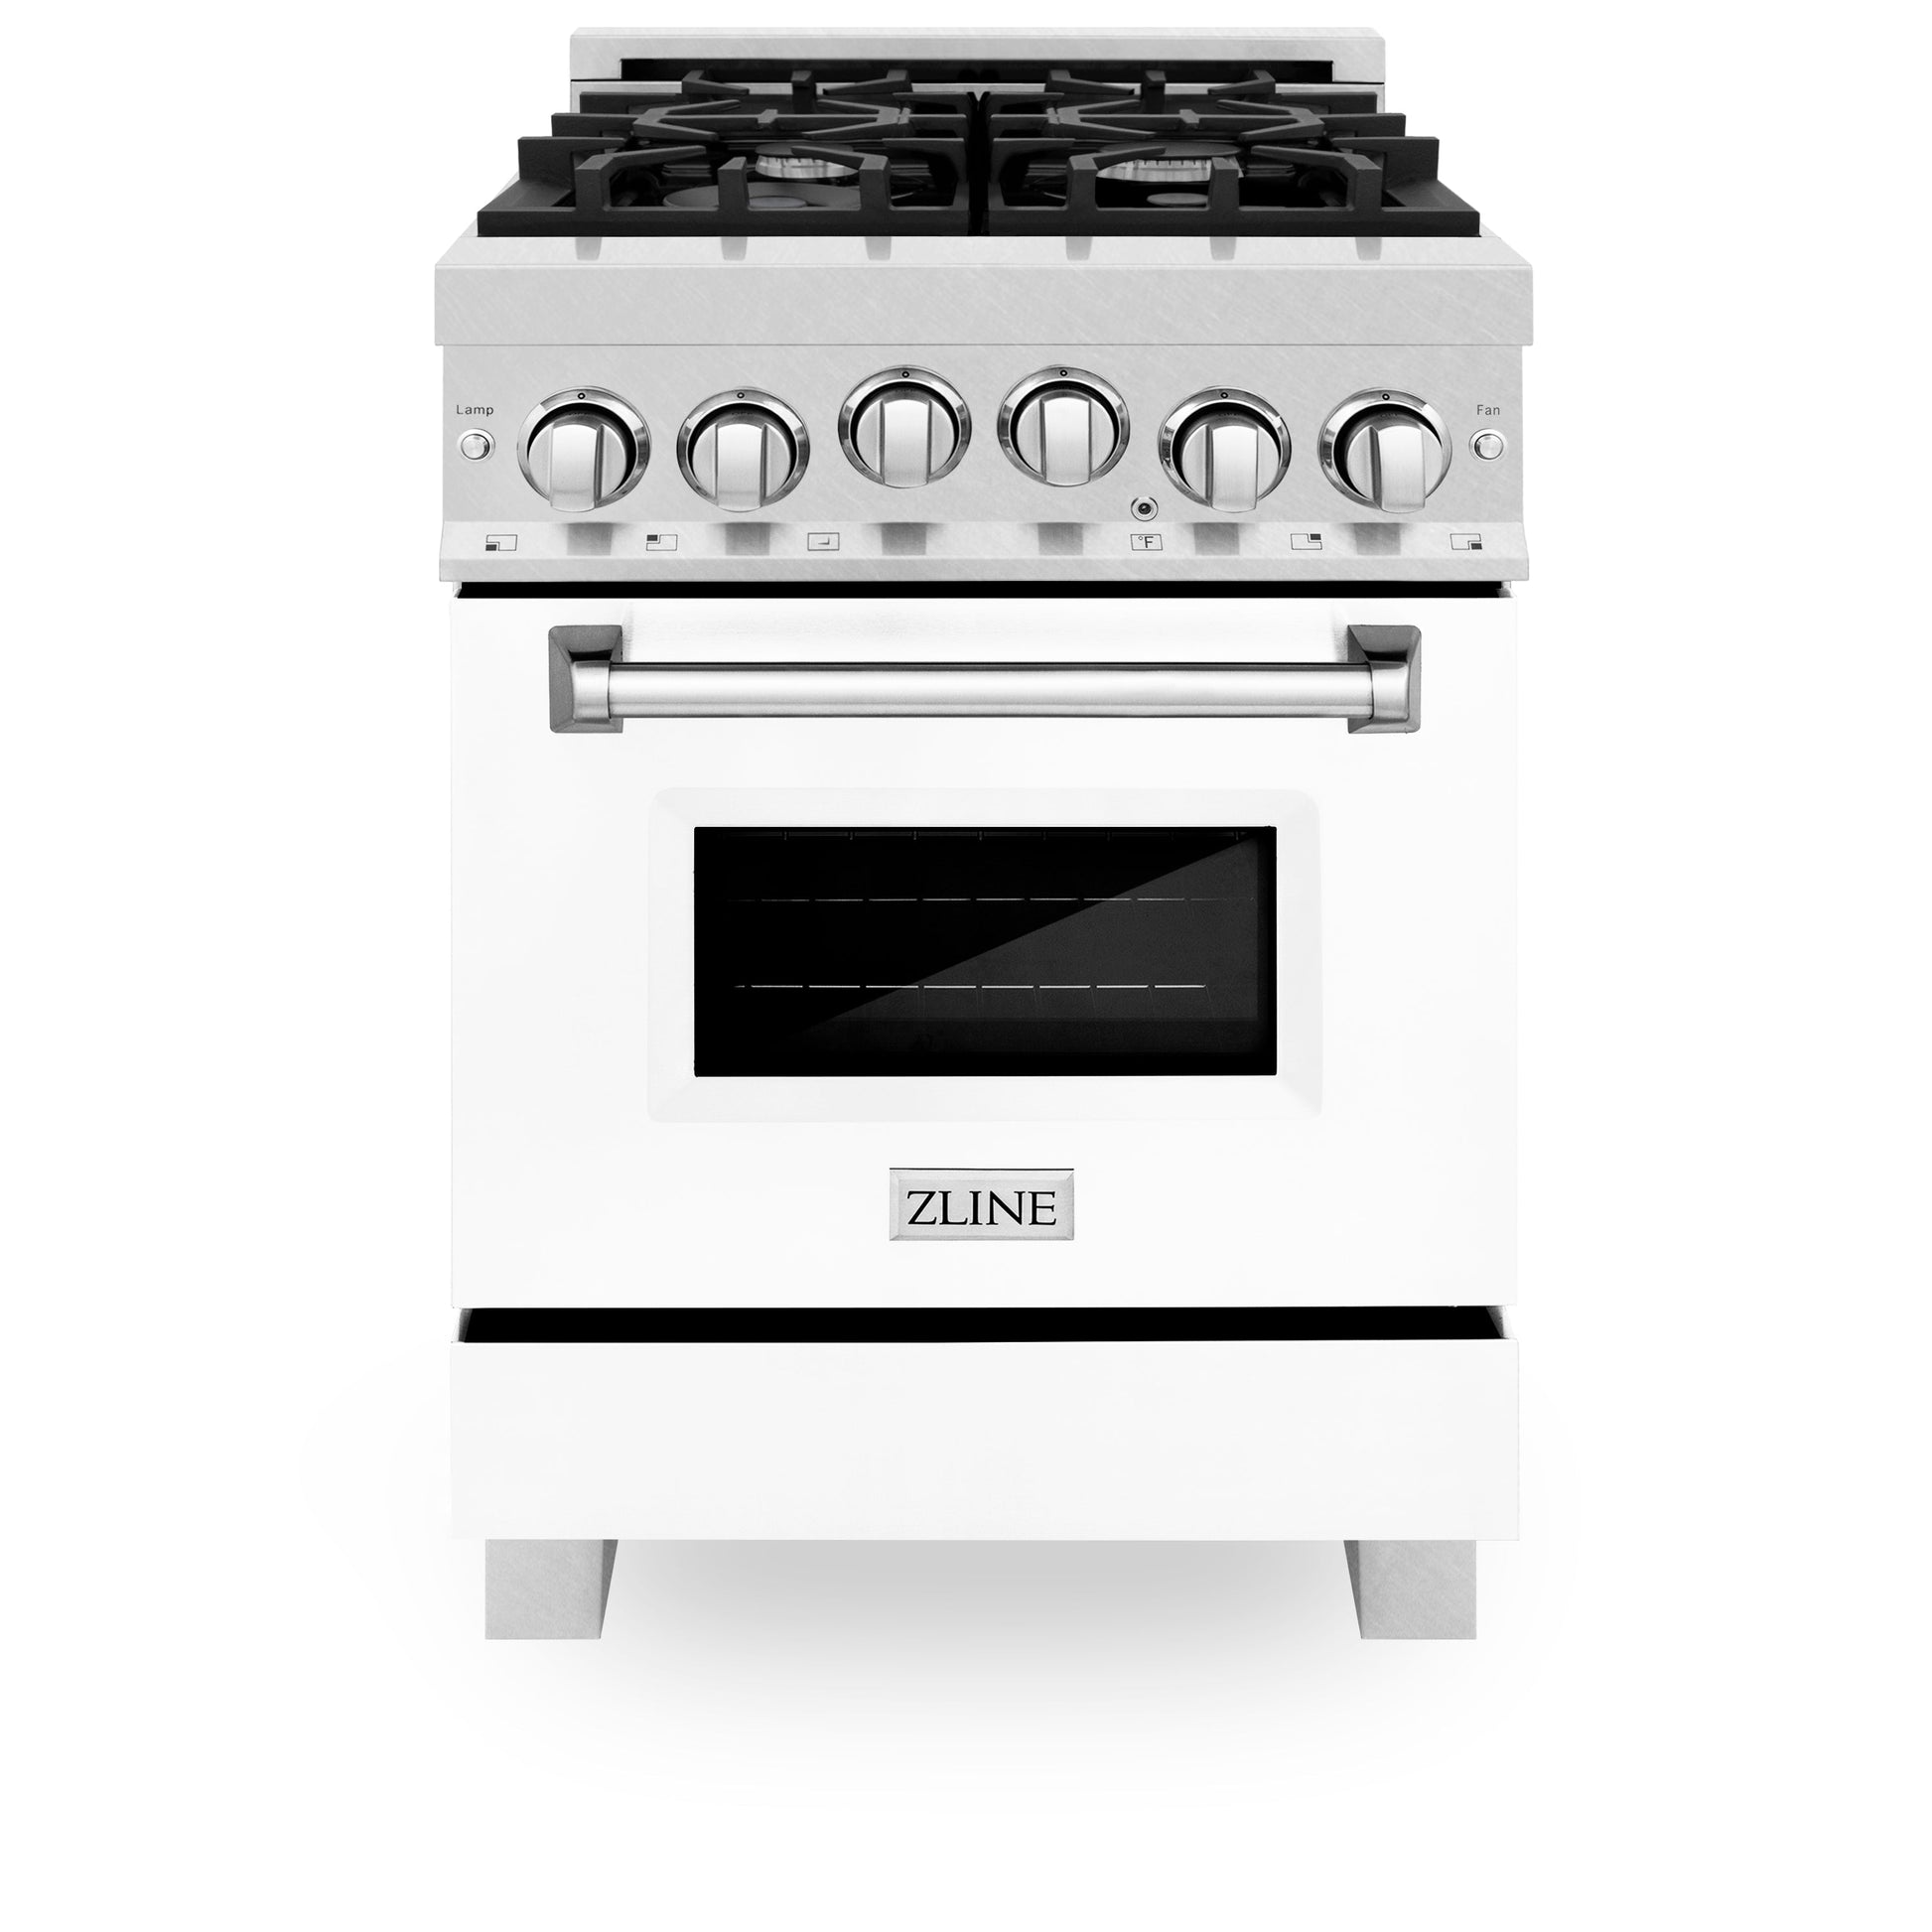 ZLINE 24" Gas Oven and Cooktop Range with Griddle - DuraSnow Stainless Steel with Matte White Door